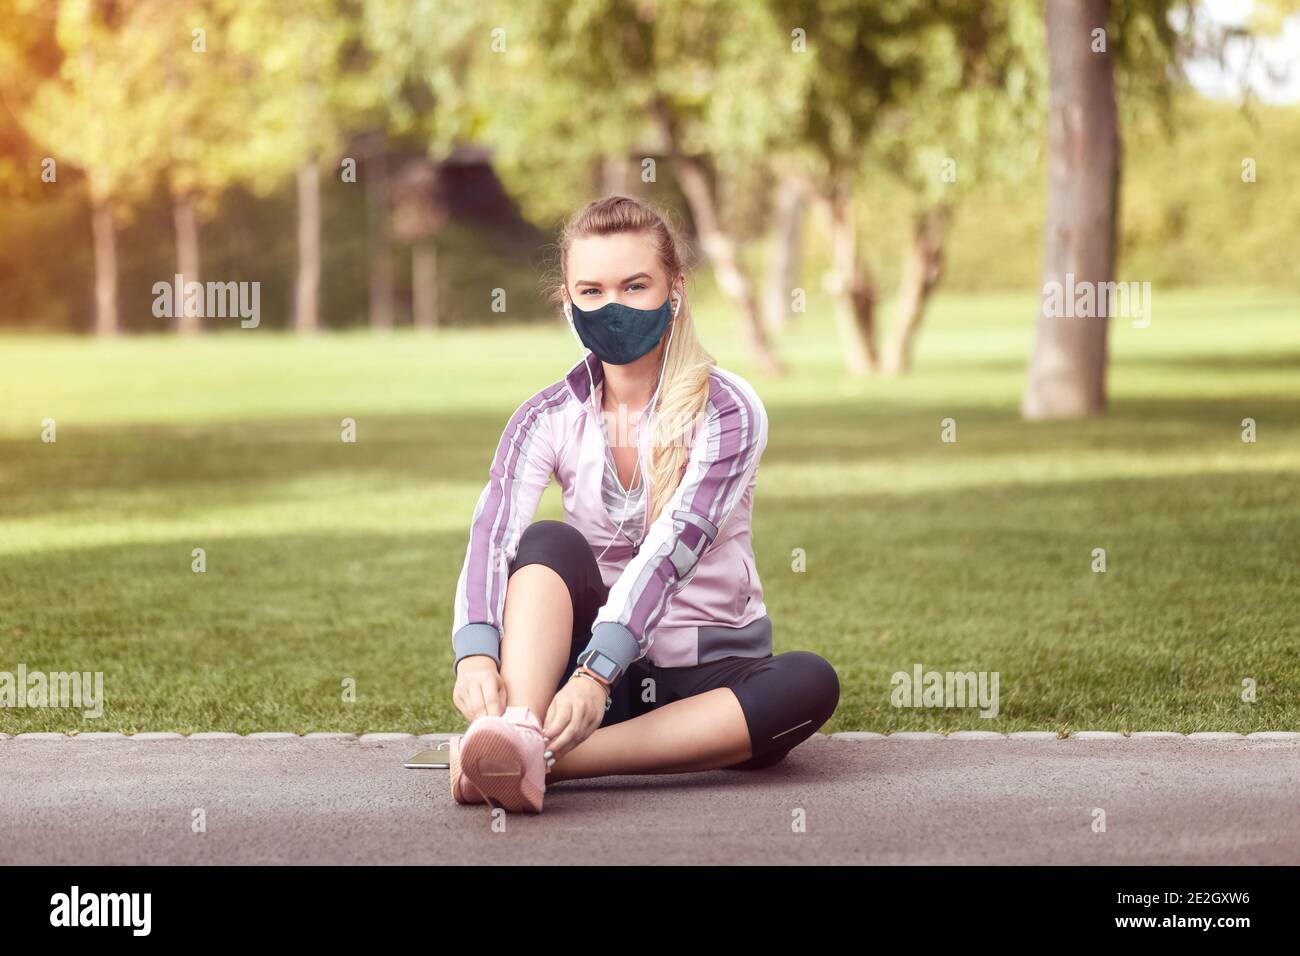 Mature woman with face mask tying sport shoes before running Stock Photo